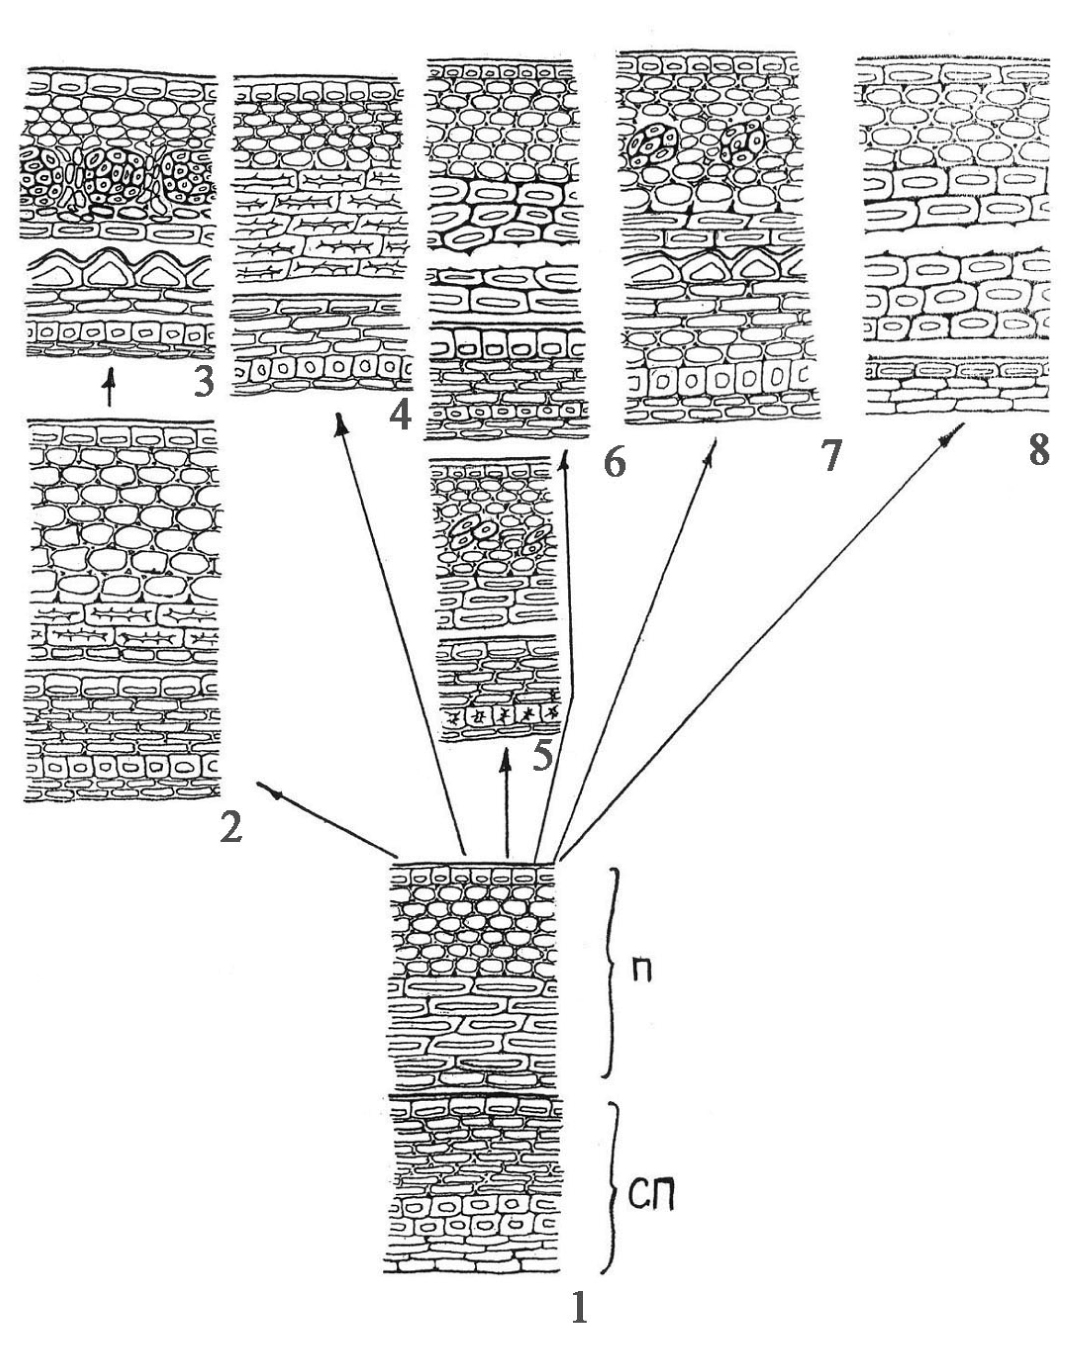 Fig. 1. Possible trends of specialization of pericarp and spermoderm structure in the Celastraceae (orig.). 1 – ancestral type of structure of the pericarp and spermoderm, 2 and 3 – pericarp and spermoderm types in subfamilies Celastroideae, 4 – pericarp and spermoderm type in subfamily Tripterygioideae, 5 and 6 – pericarp and spermoderm types in subfamilies Cassinoideae, 7 – pericarp and spermoderm type in subfamily Hippocrateoideae, 8 – pericarp and spermoderm type in subfamily Siphonodontoideae, П – pericarp, СП – spermoderm.